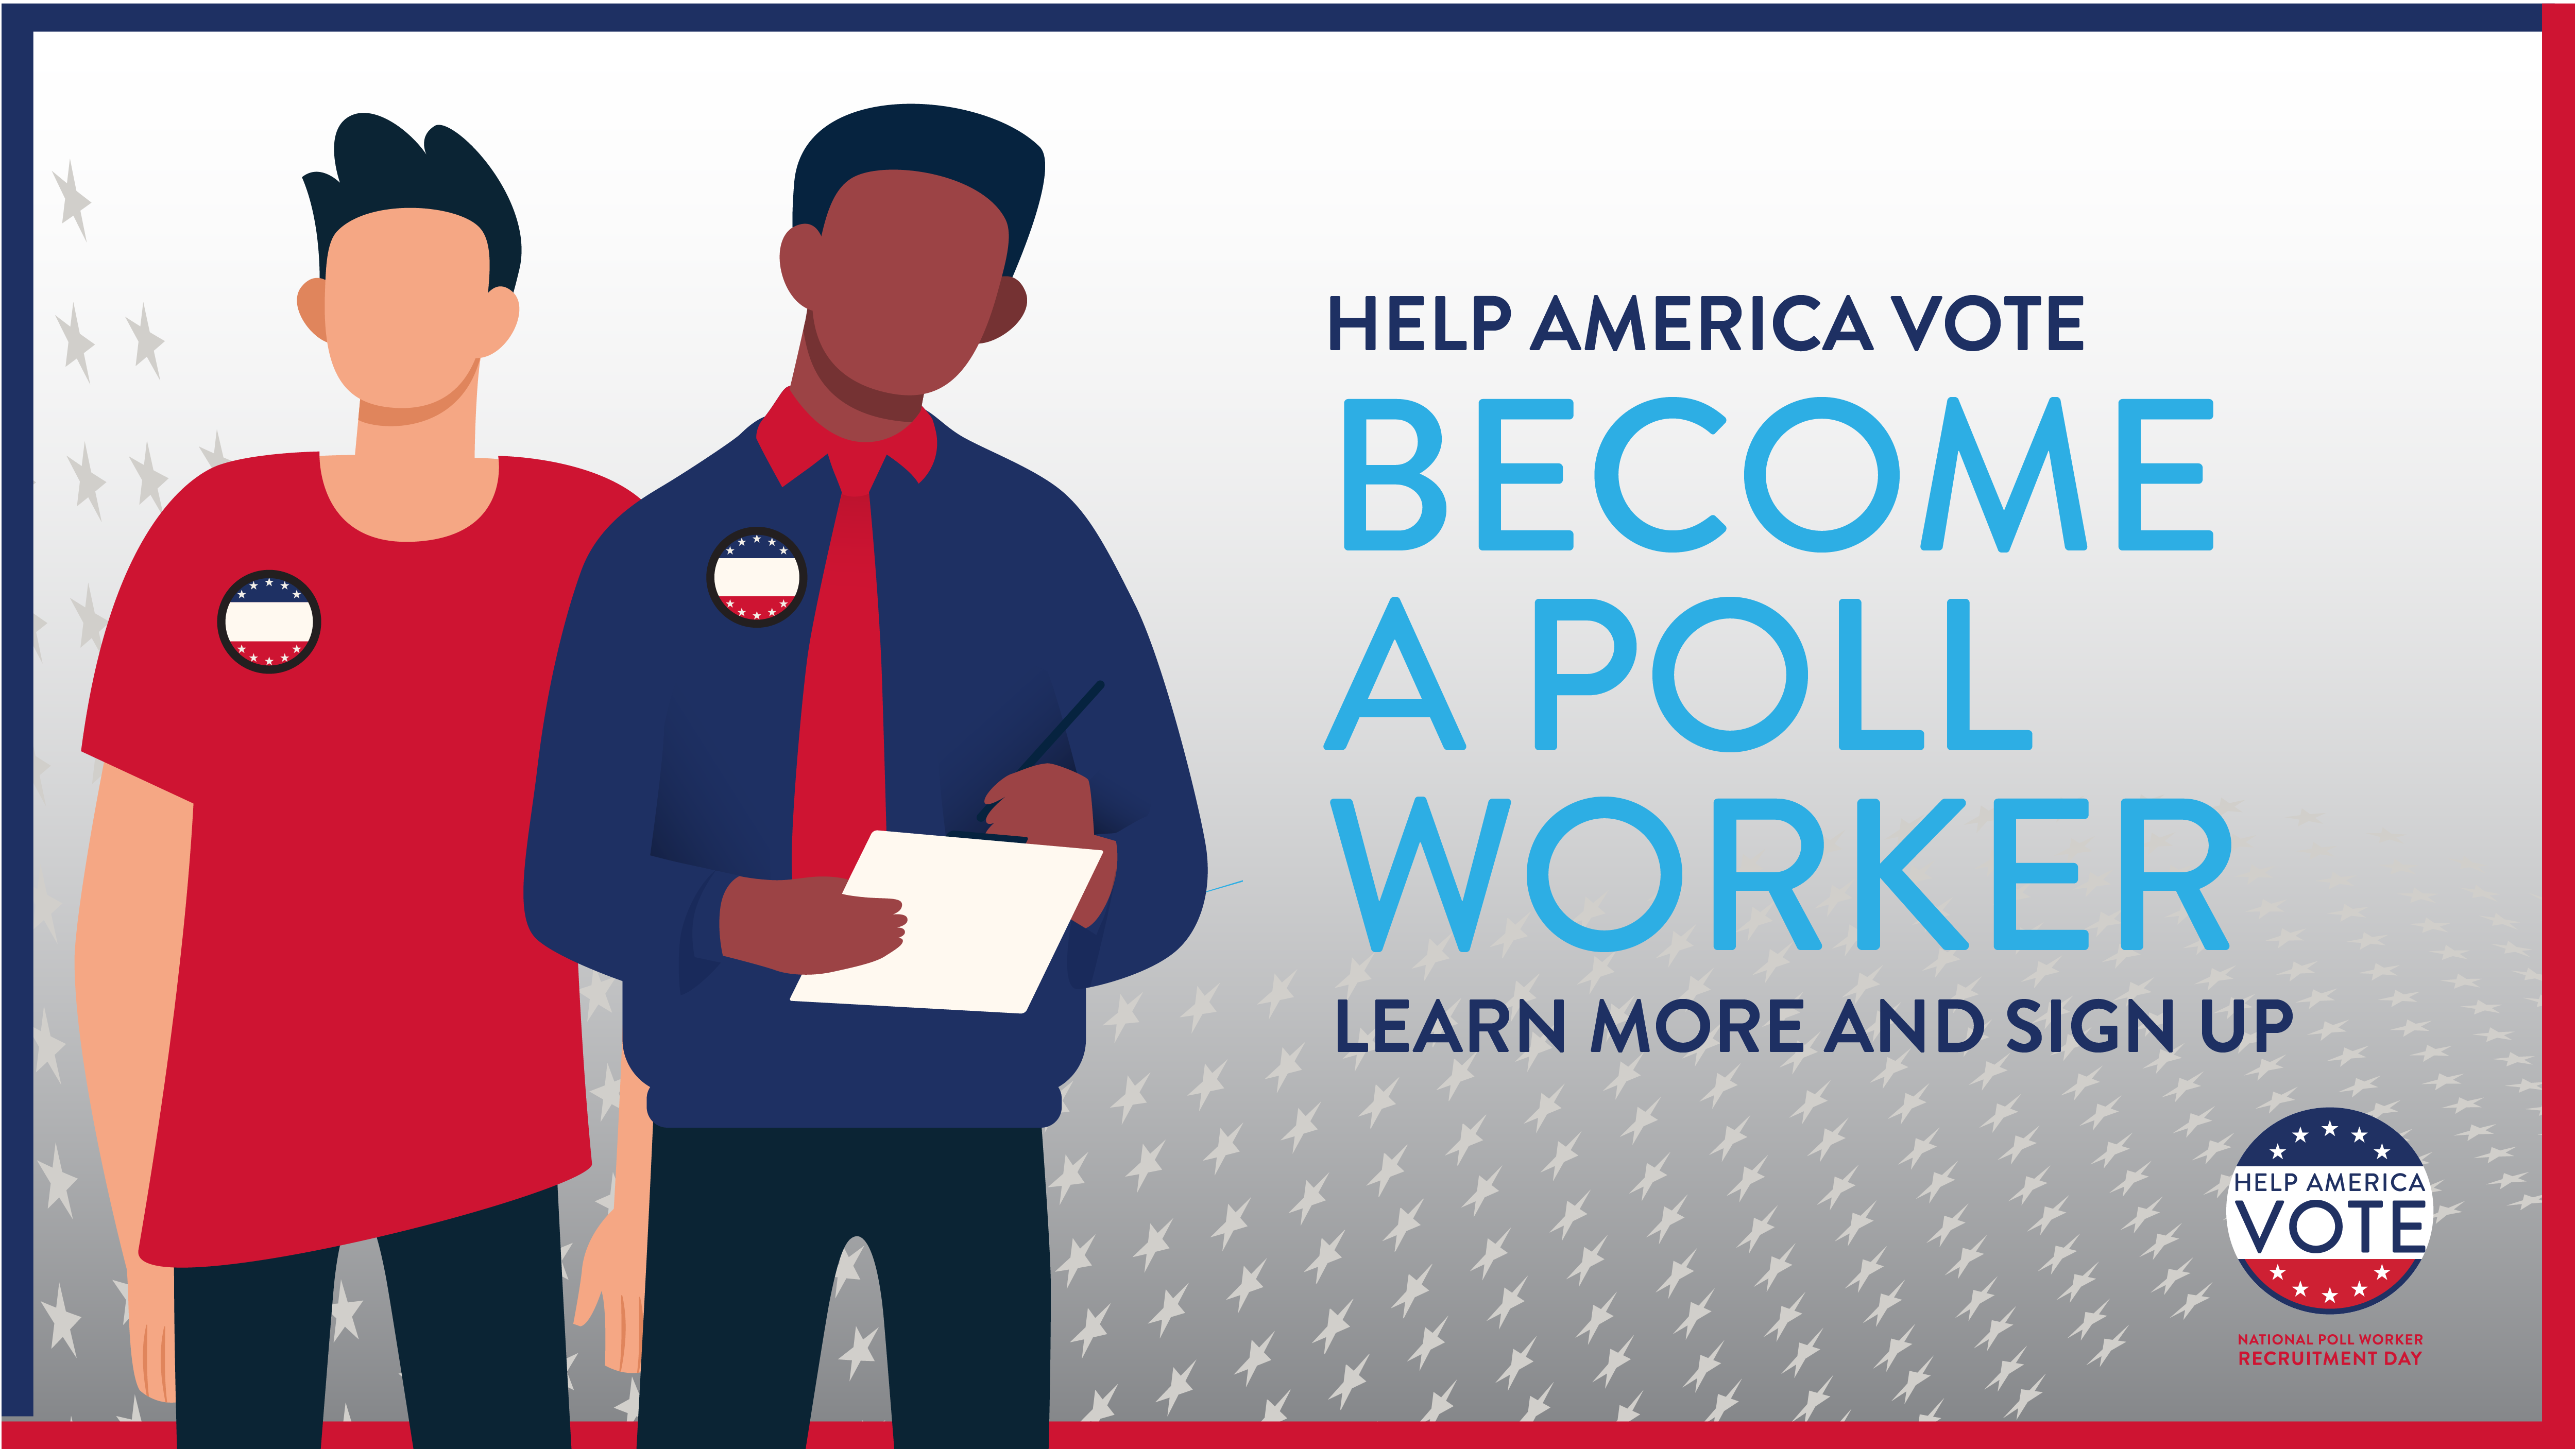 Become a Poll Worker Today, Learn More and Sign Up, Help American Vote, National Poll Worker Recruitment Day